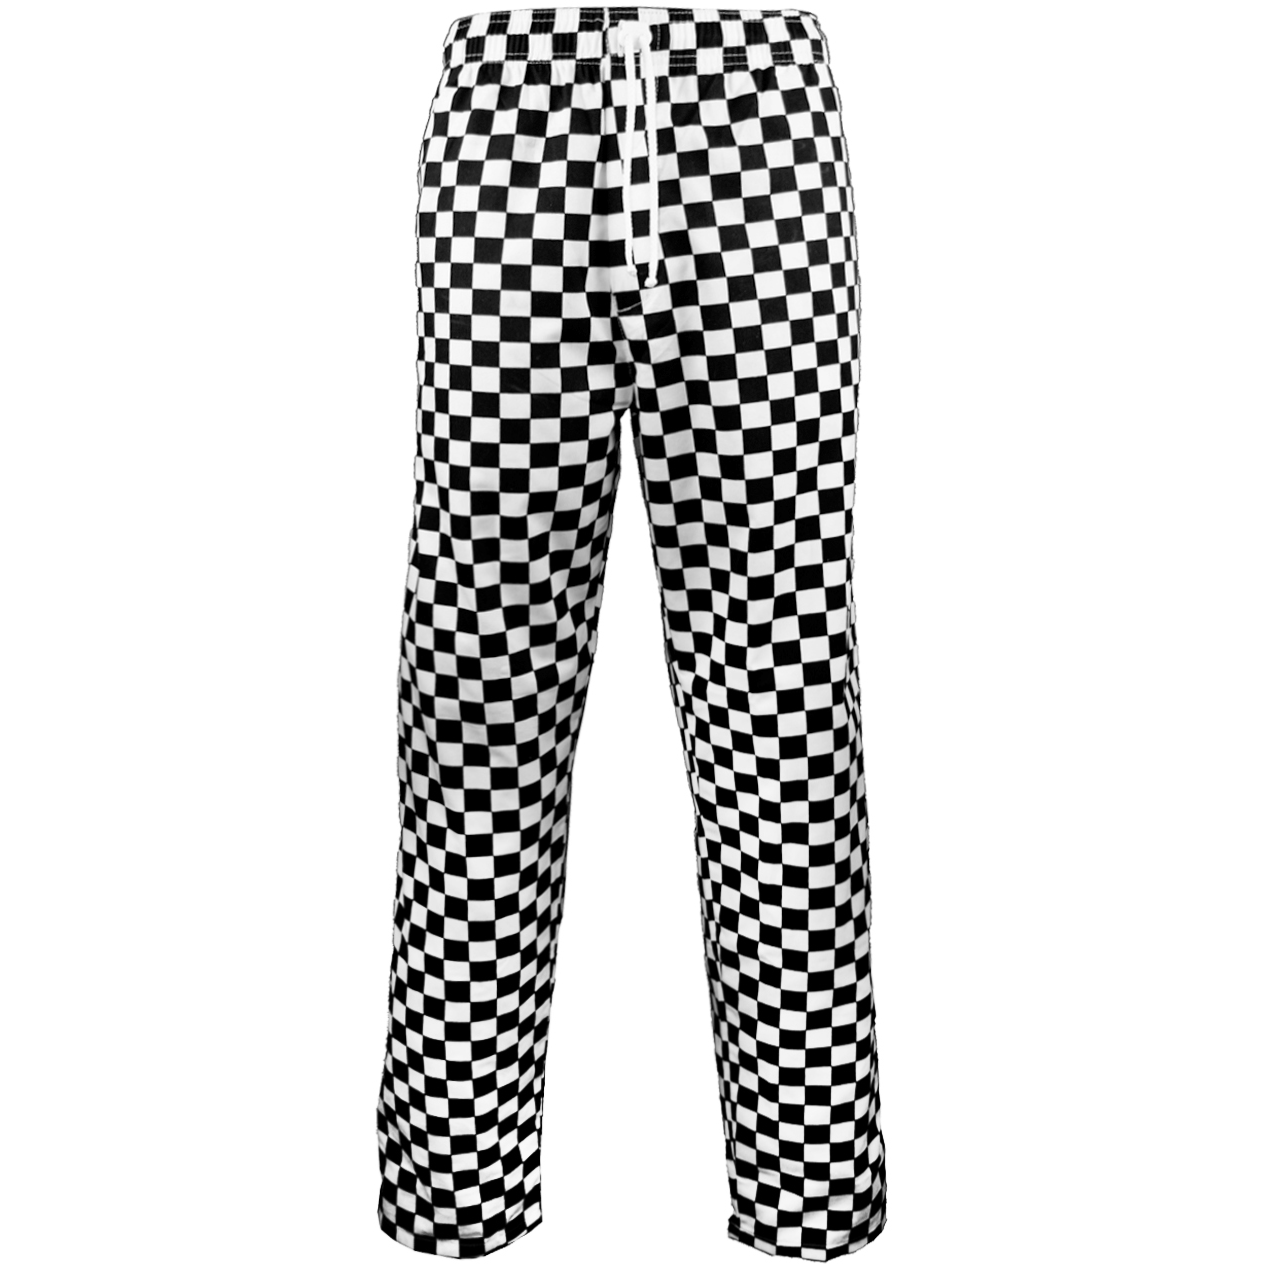 CHEF'S TROUSERS: UNISEX CHEQUERBOARD